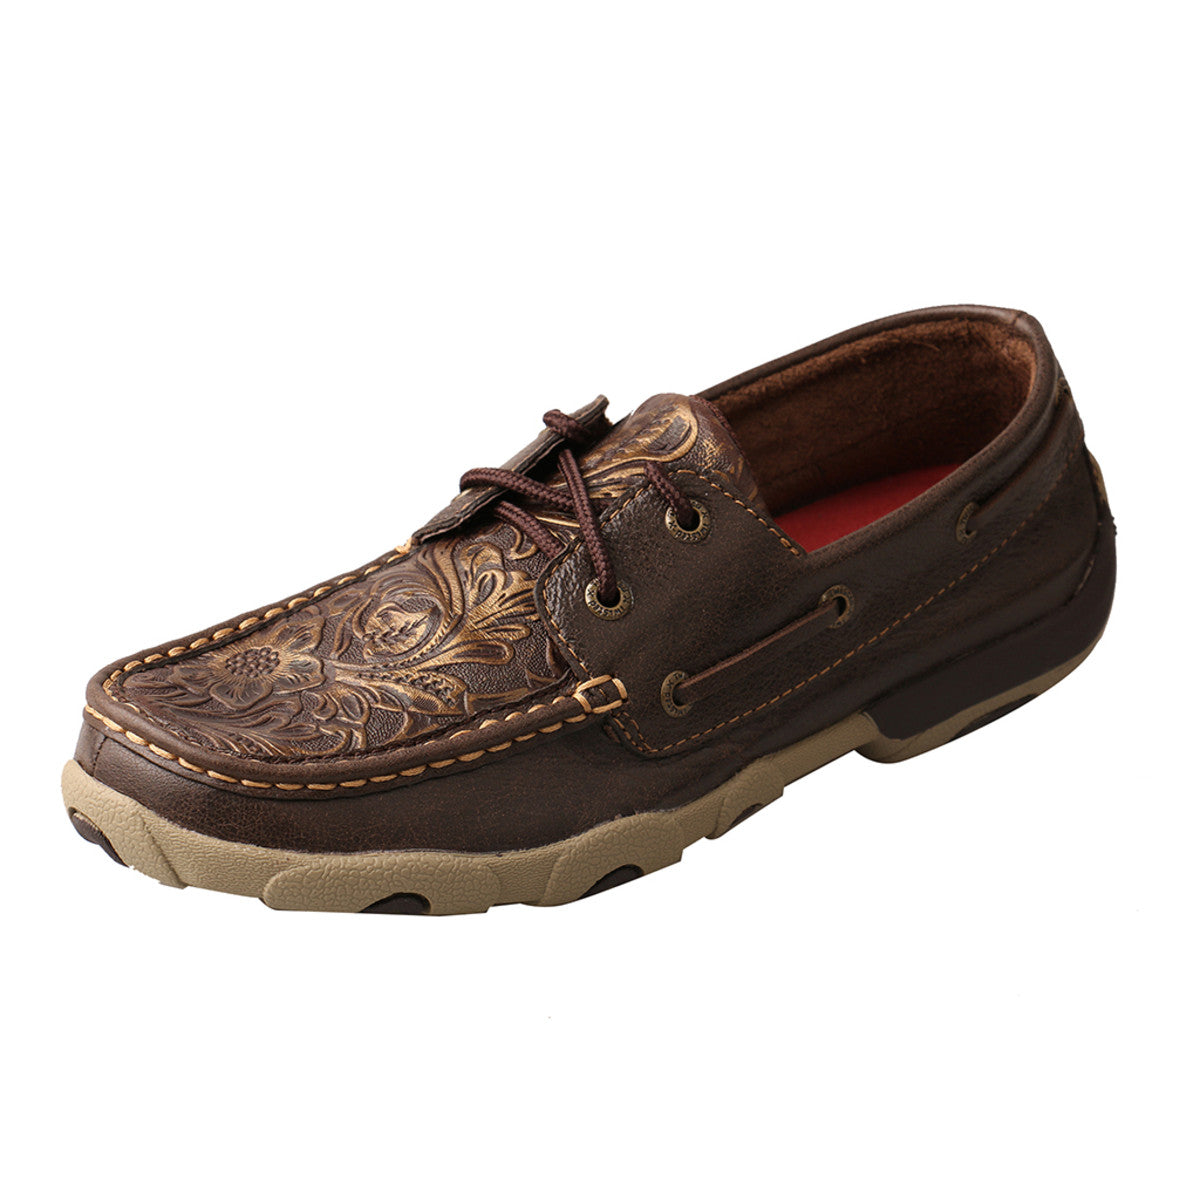 Women's Twisted X Boat Shoe Driving Moccasins in Brown & Embossed Flower from the side view